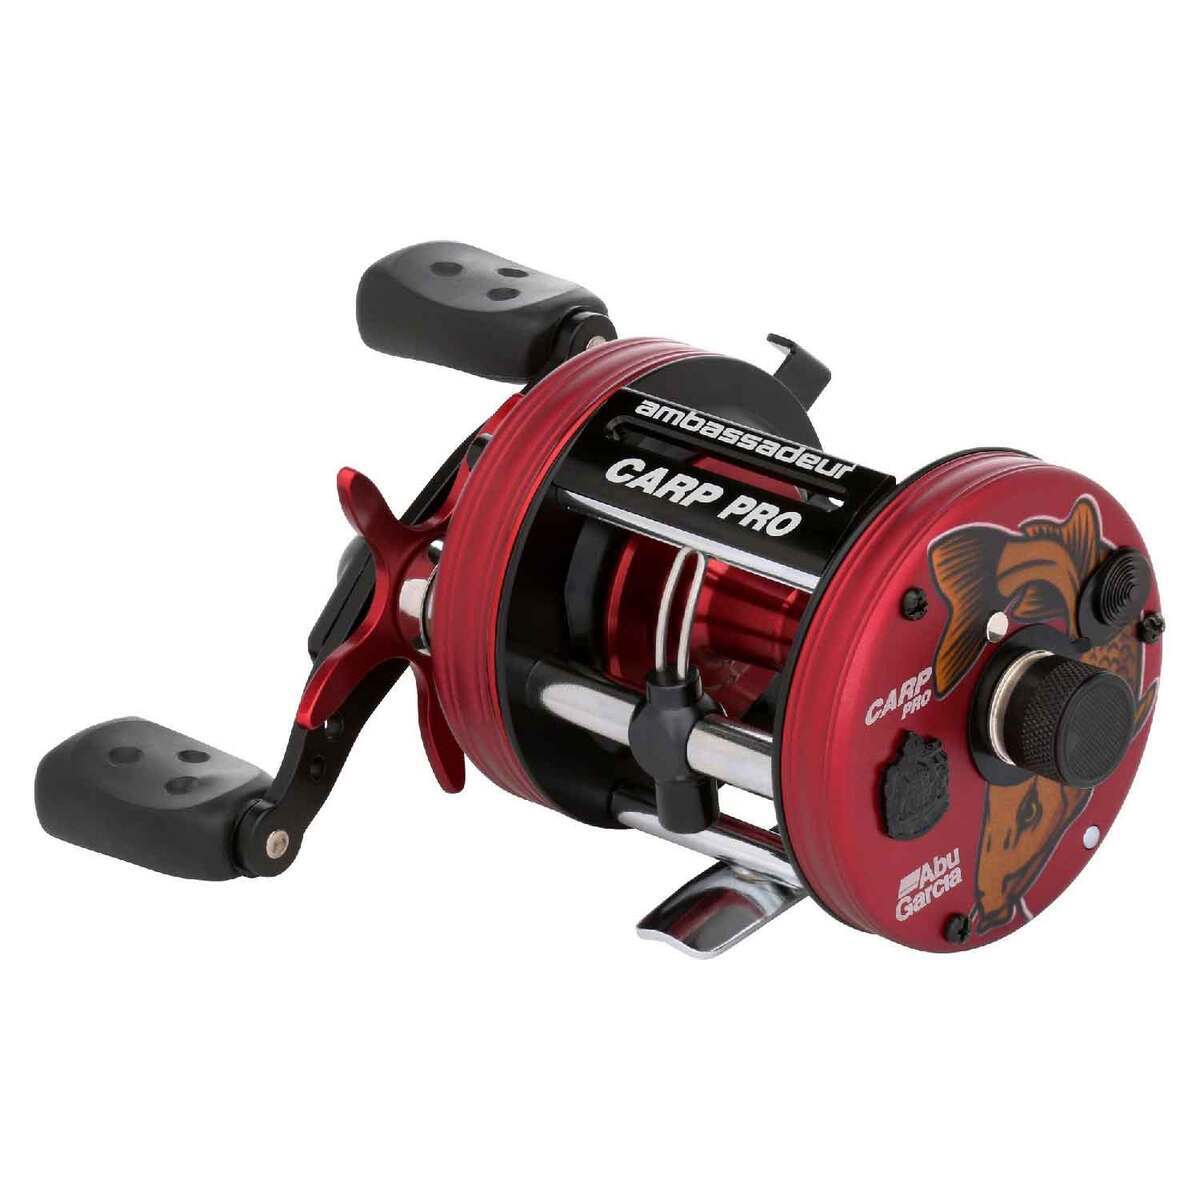 abu garcia fishing reels, abu garcia fishing reels Suppliers and